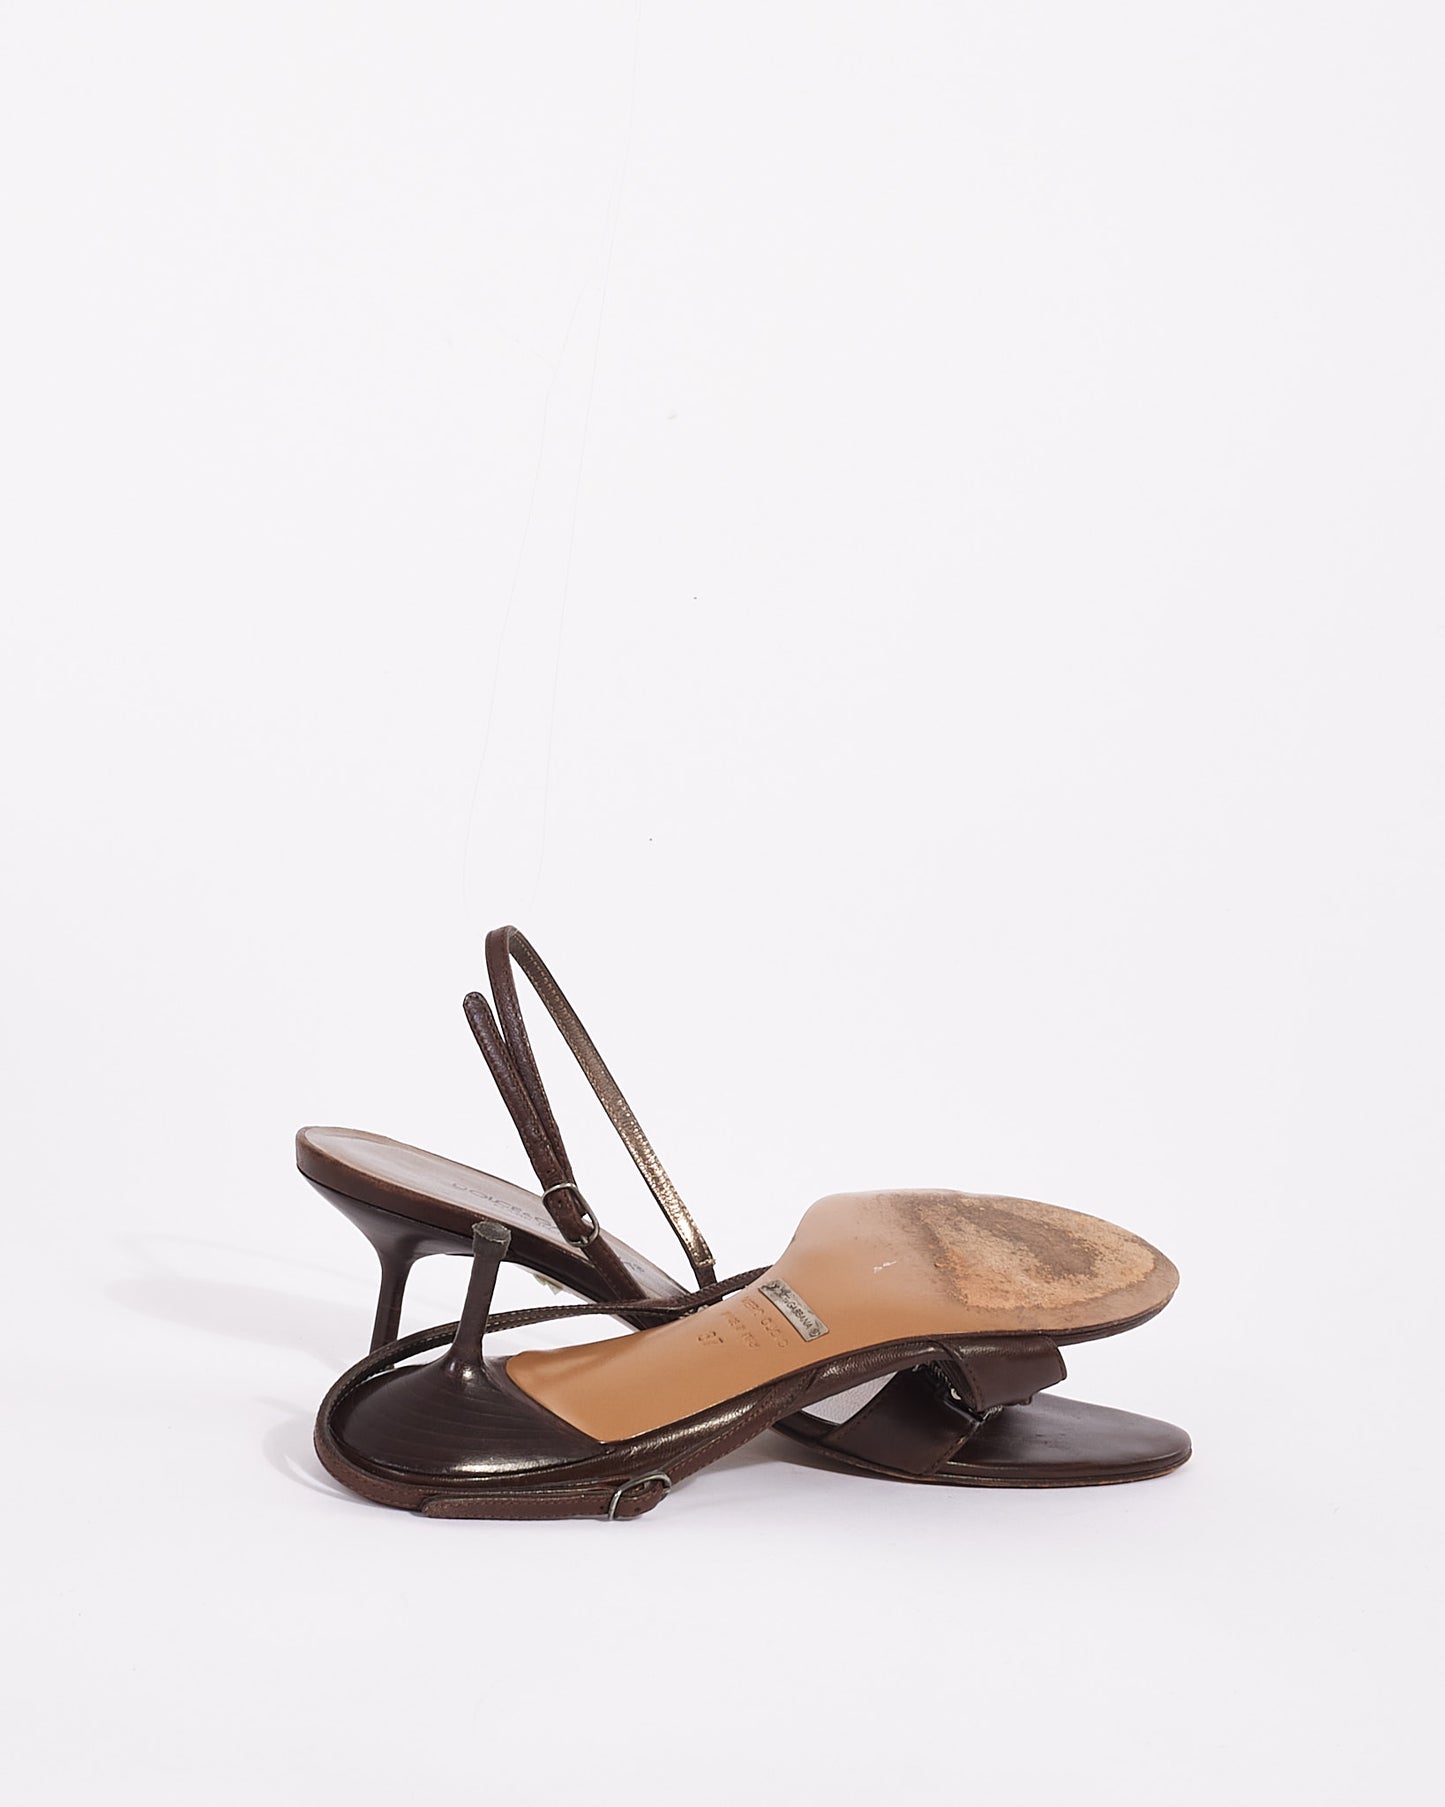 Dolce & Gabbana Brown Leather Heeled Sandals - 37